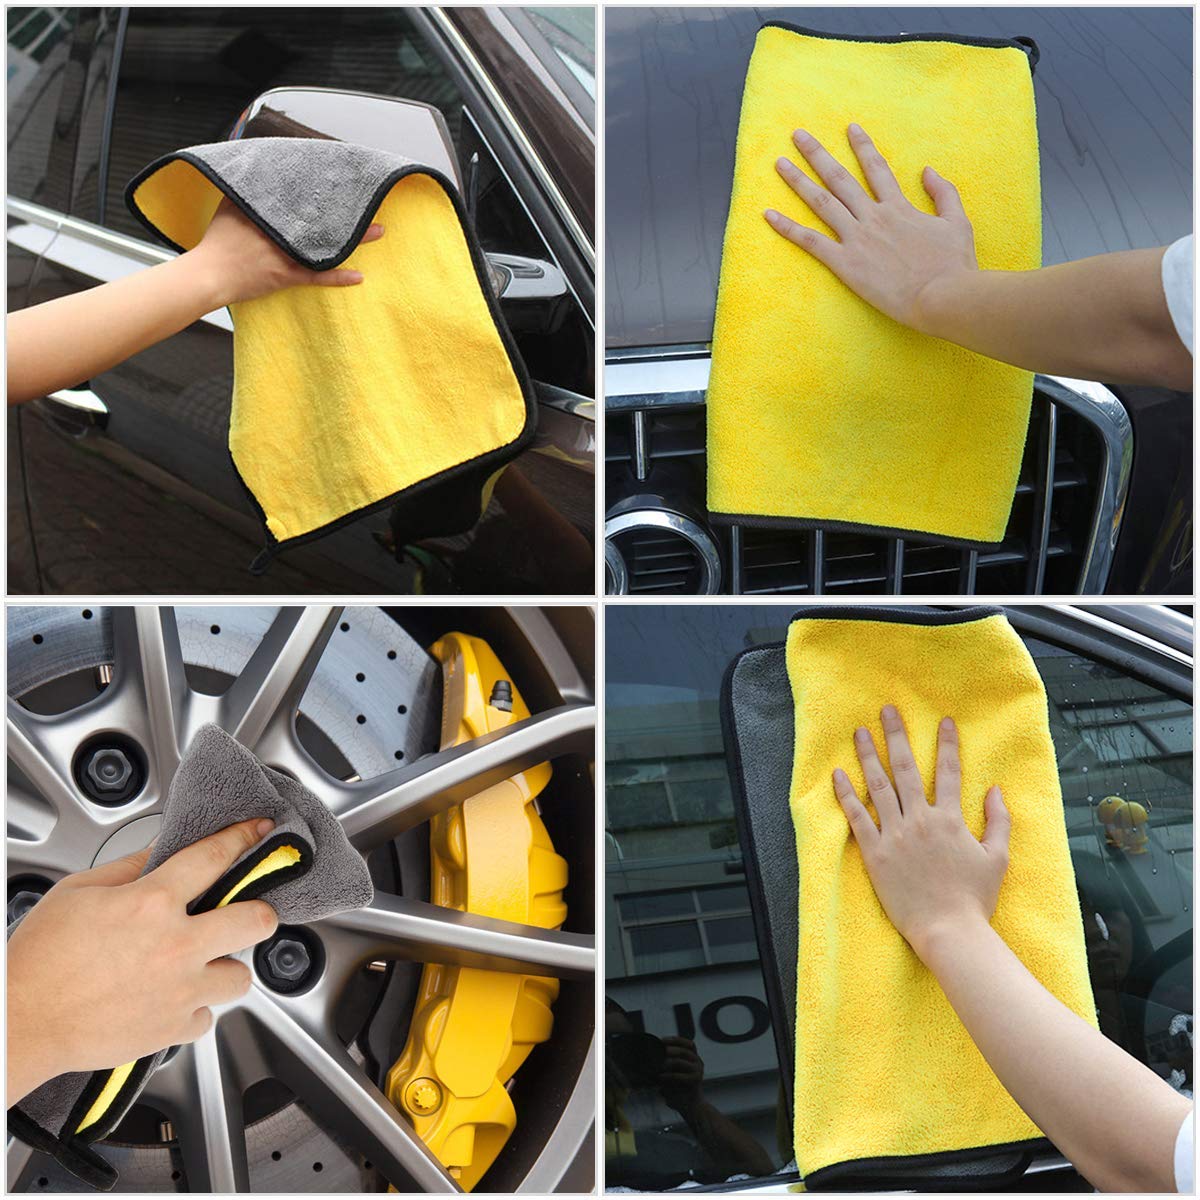 Microfiber Cleaning Cloth 800 GSM for Car & Motorbike- Pack of 1 (30 x 30 cm)